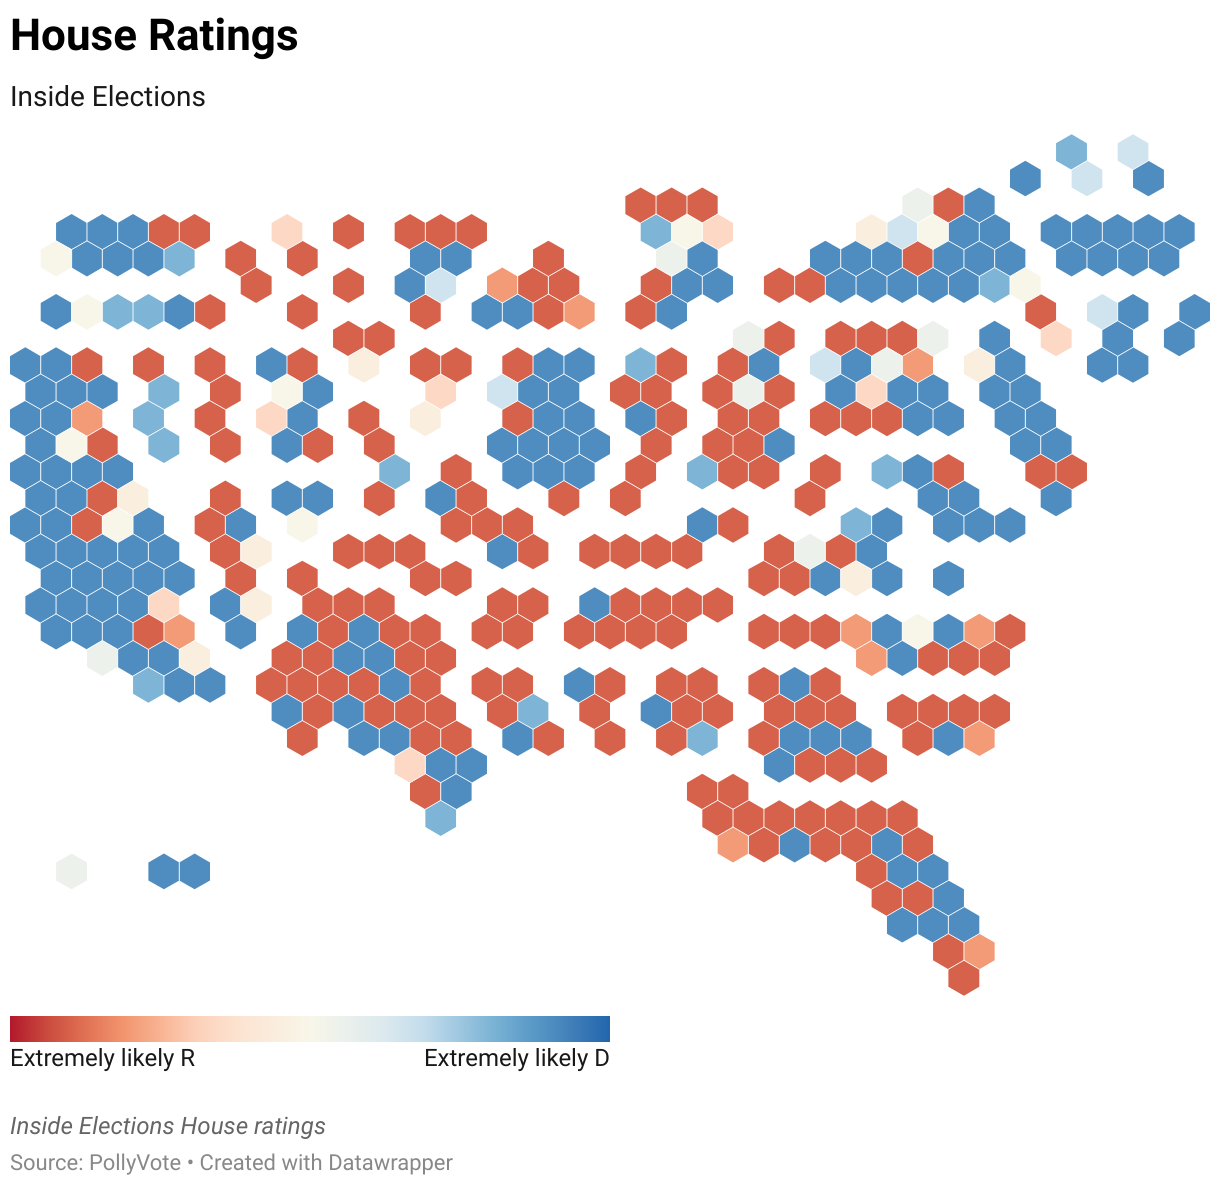 Inside Elections House ratings for the 2024 U.S. House of Representatives Election